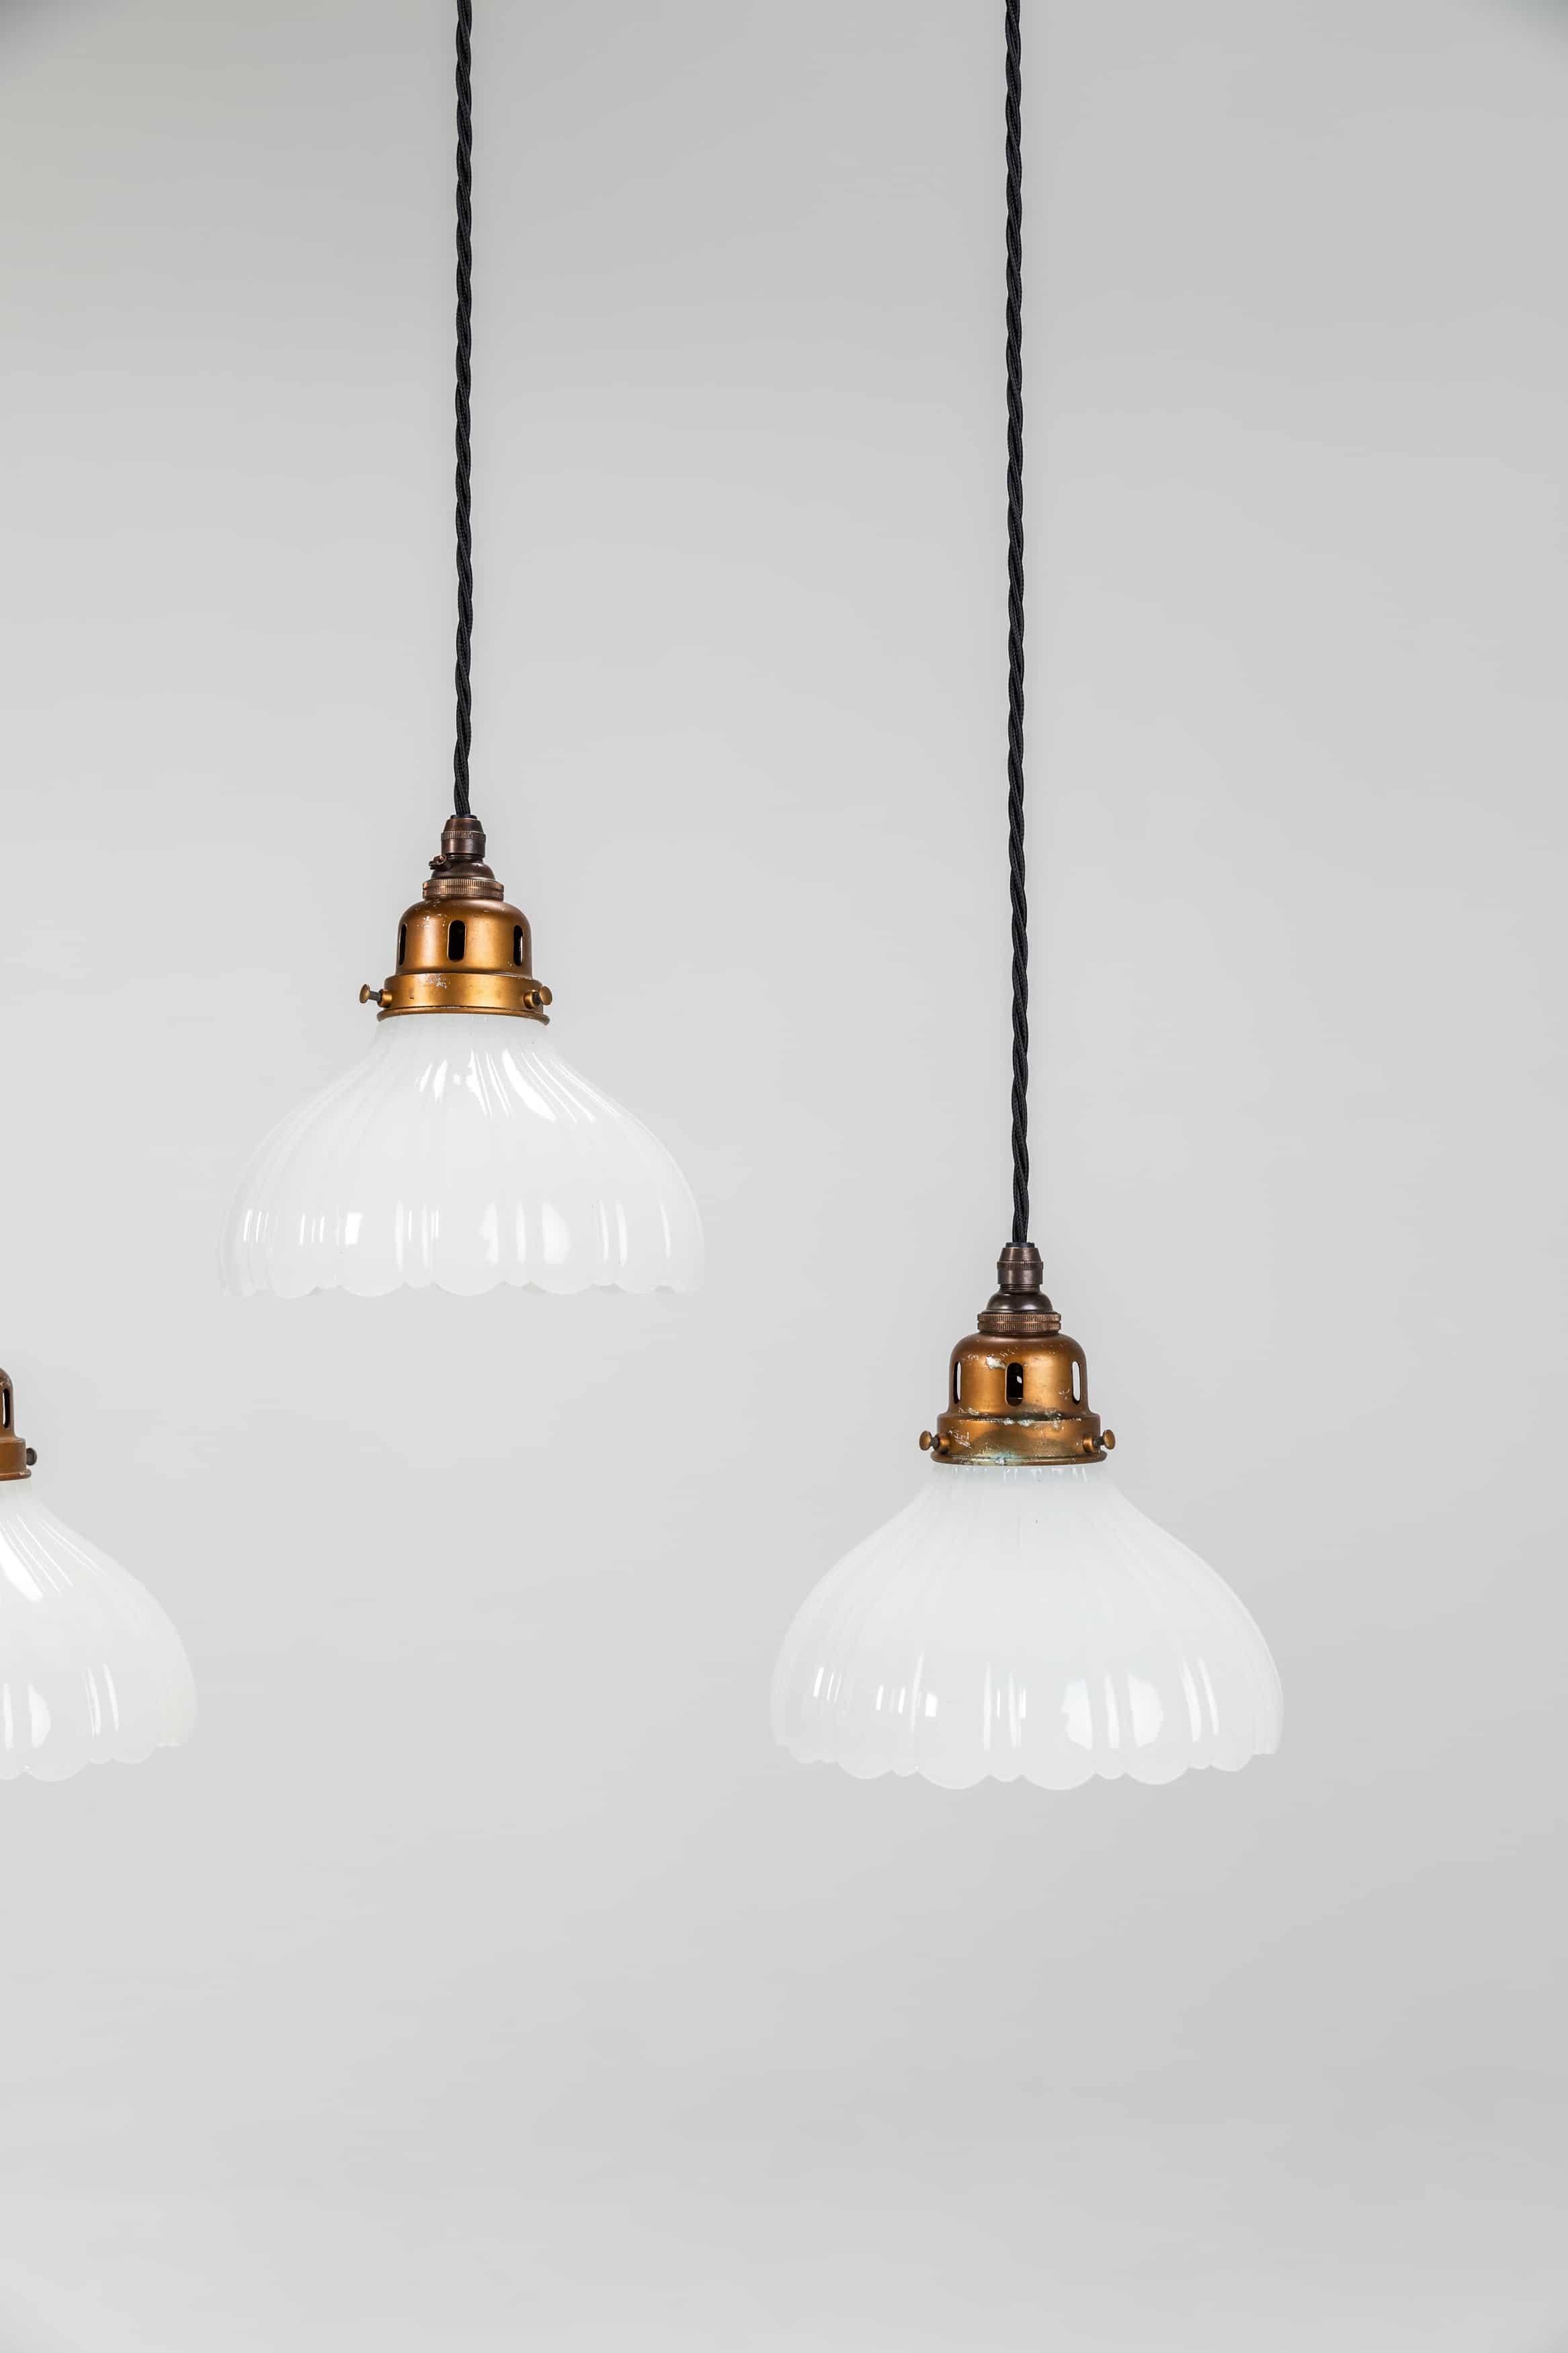 A beautiful run of heavy duty Jefferson Moonstone glass pendant lights. c.1920

Excellent quality lamps with thick pressed opaque fluted glass shades and faux bronze galleries. Price is per lamp.

Rewired with 1m of black twist flex.